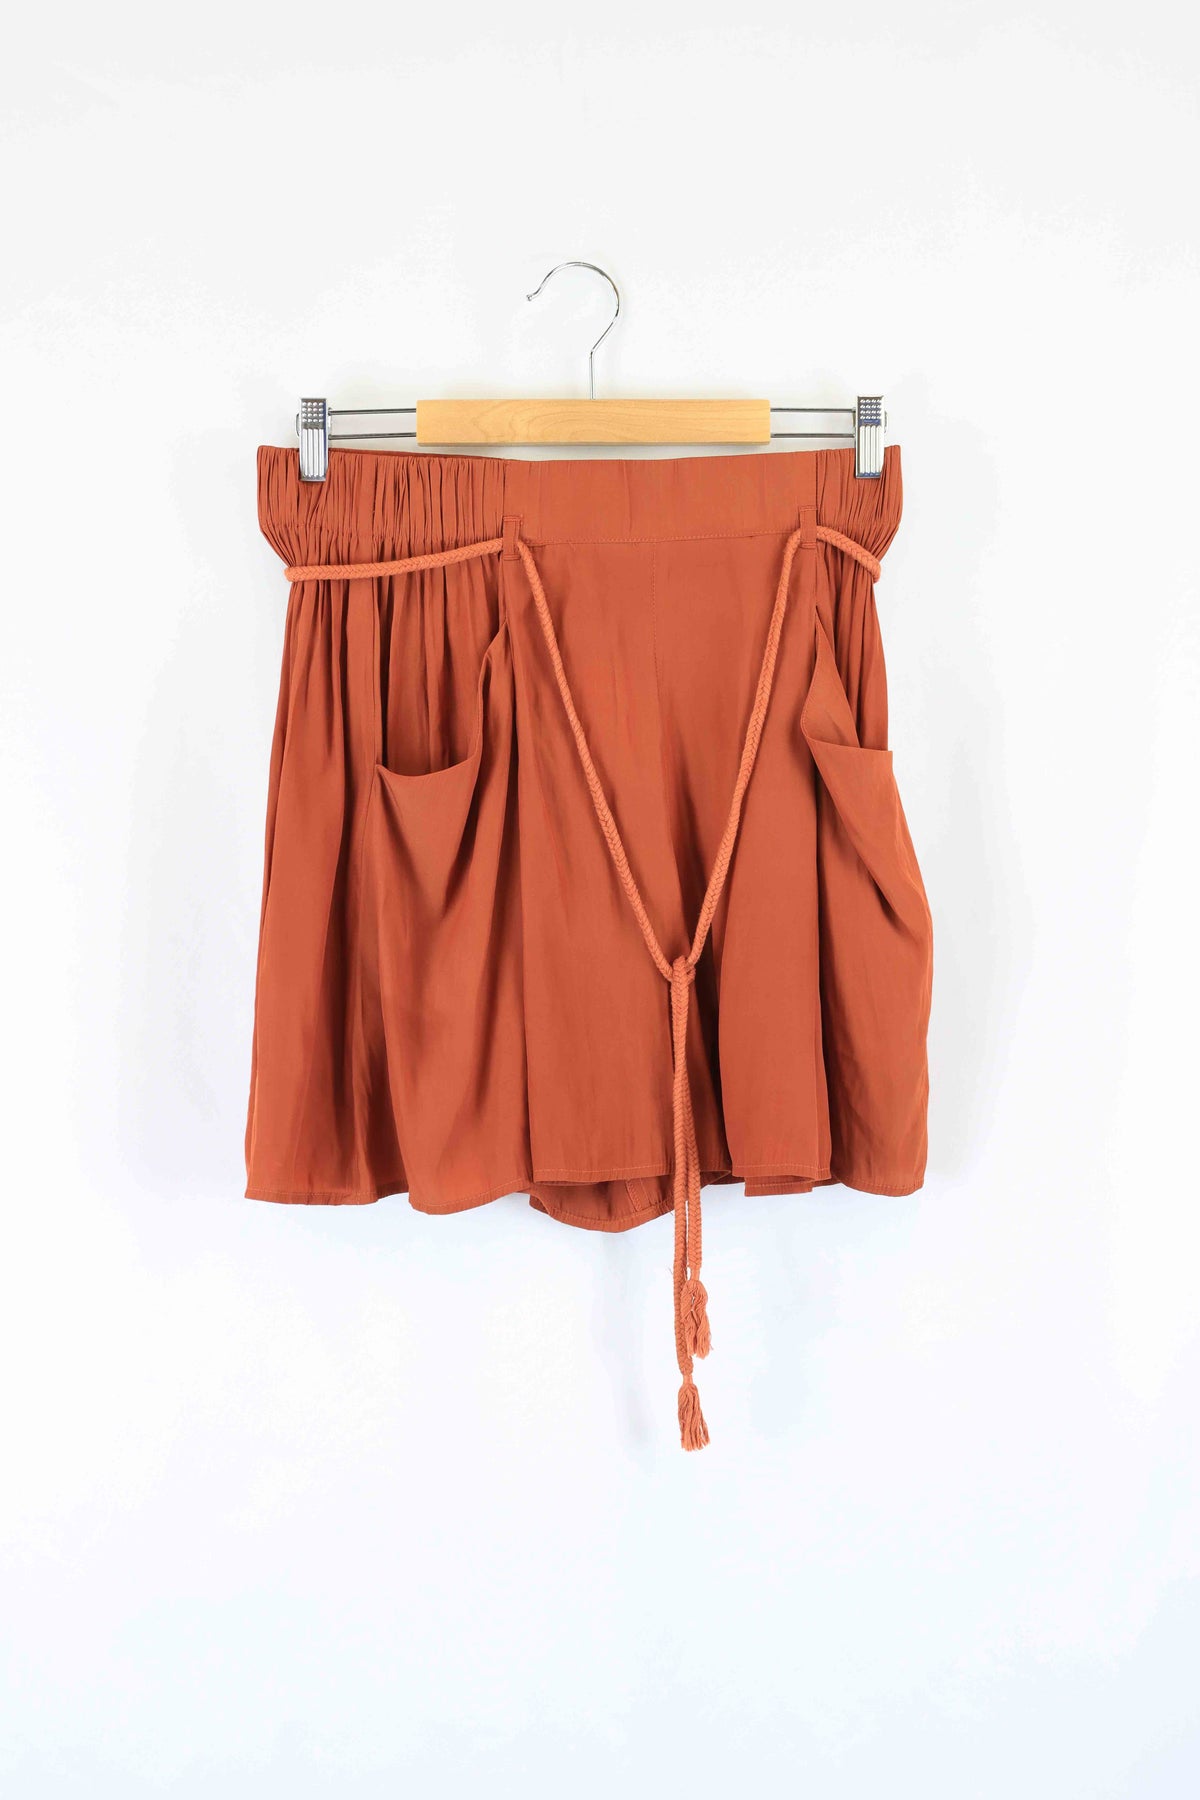 Country Road Brown Shorts 10